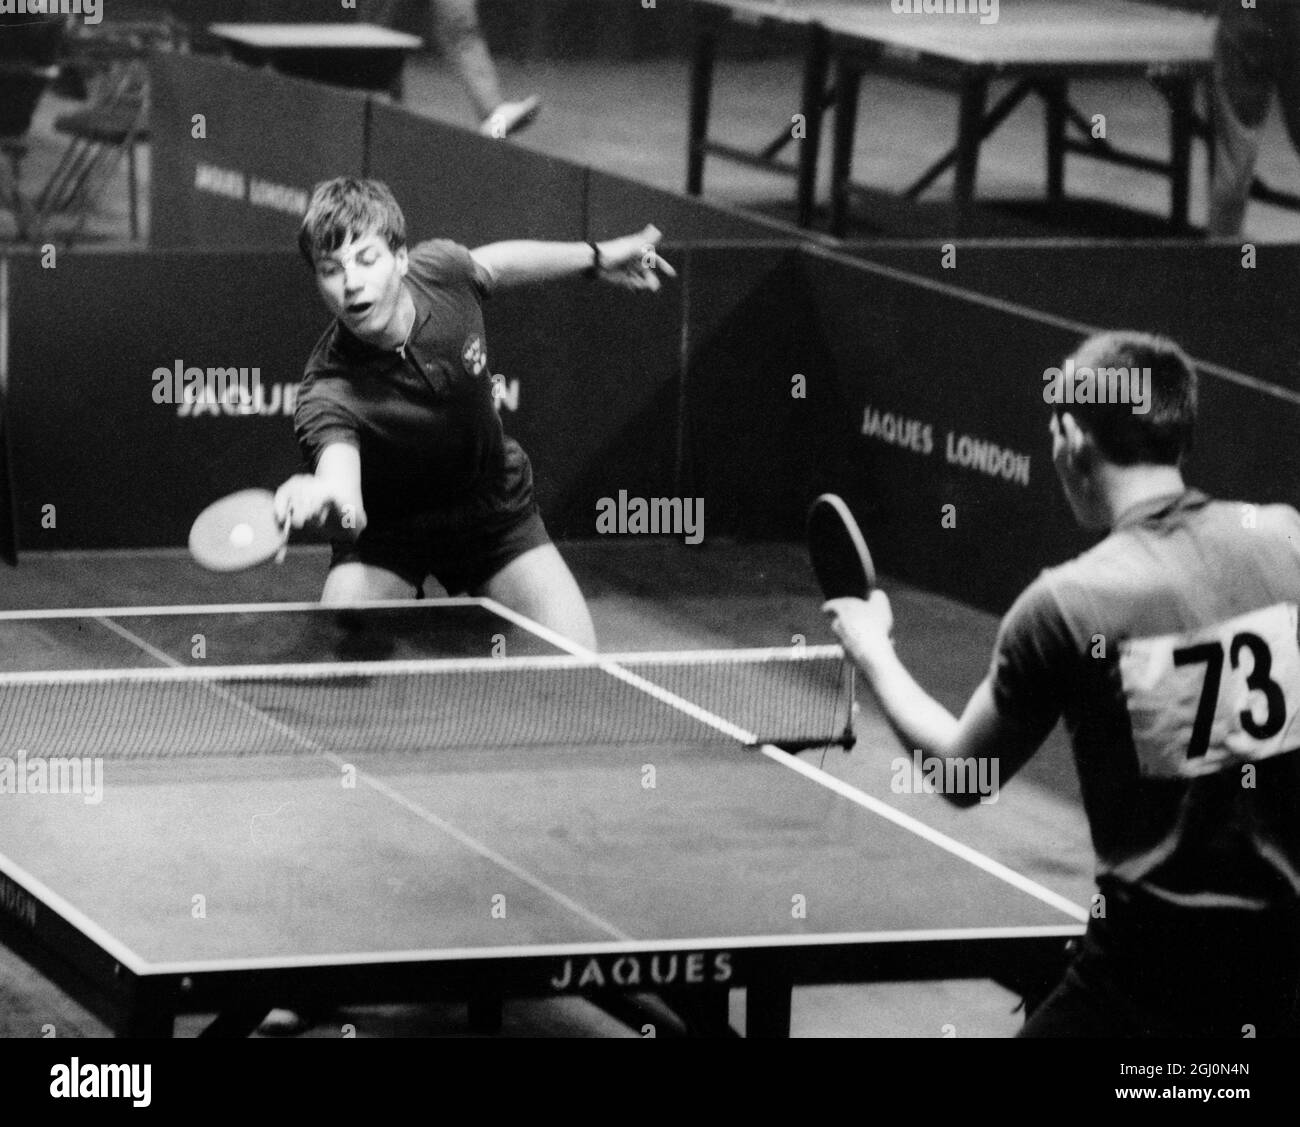 Sweden ' s wonder boy of table tennis , Kjell Johansson , current holder of the Men ' s Singles Title and No. 1 seed this year , is photographed in action at the Empire Pool , Wembley , during his game with Bulgaria ' s Peter Velikov ( right ) , in the European Table Tennis Championships . Stock Photo